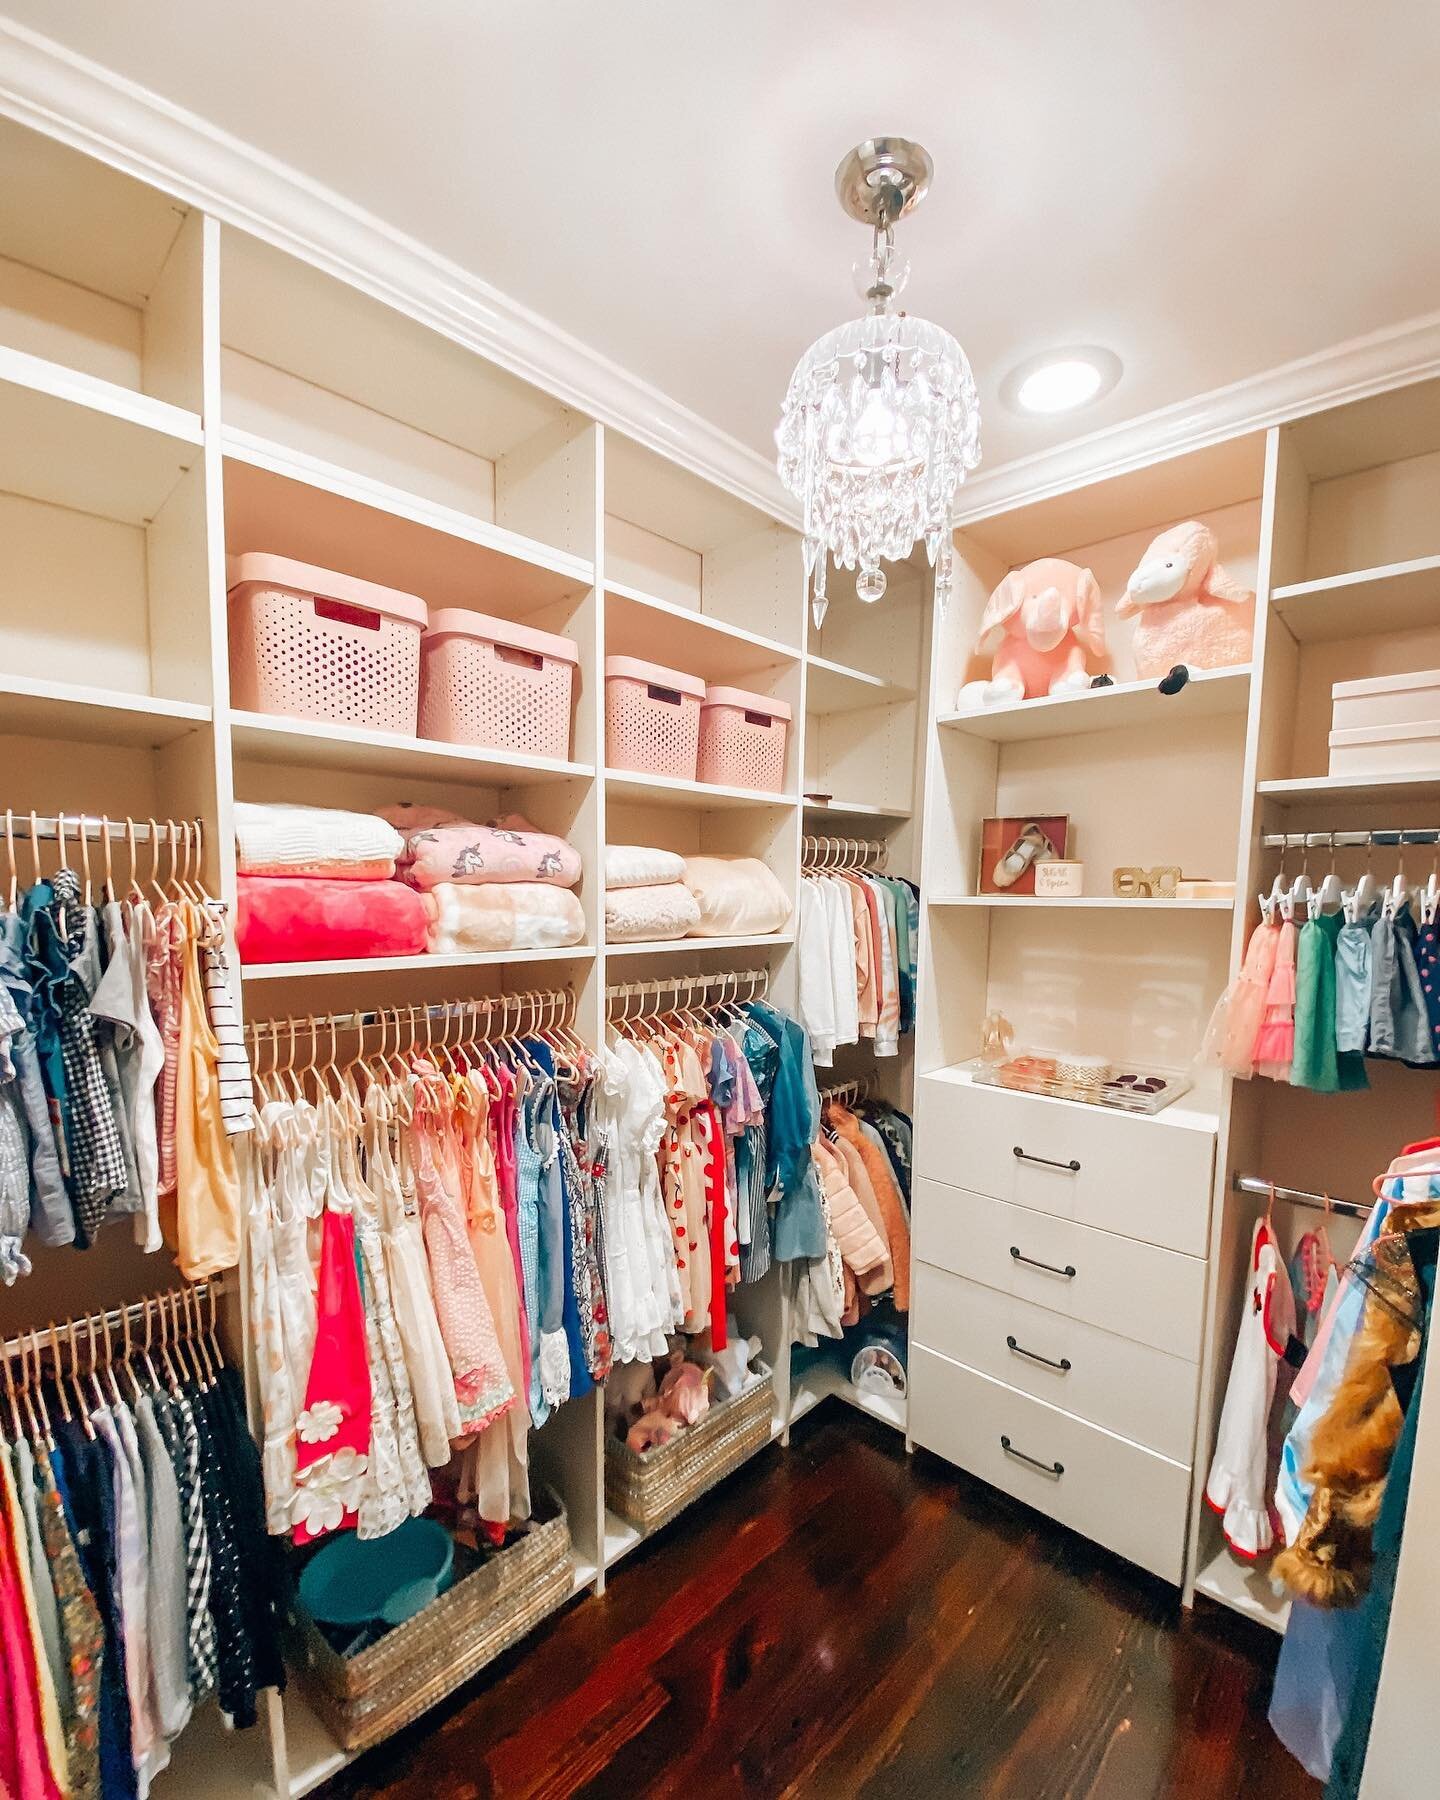 A closet fit for a princess ✨ Swipe to see the transformation of this dream walk-in closet! With matching baskets and hangers, easily reachable hanging zones for clothing, and low level bins for toys, this closet went from 0 to 💯. ⁠⁠ ⁠⁠ ⁠⁠ ⁠⁠ #Organ